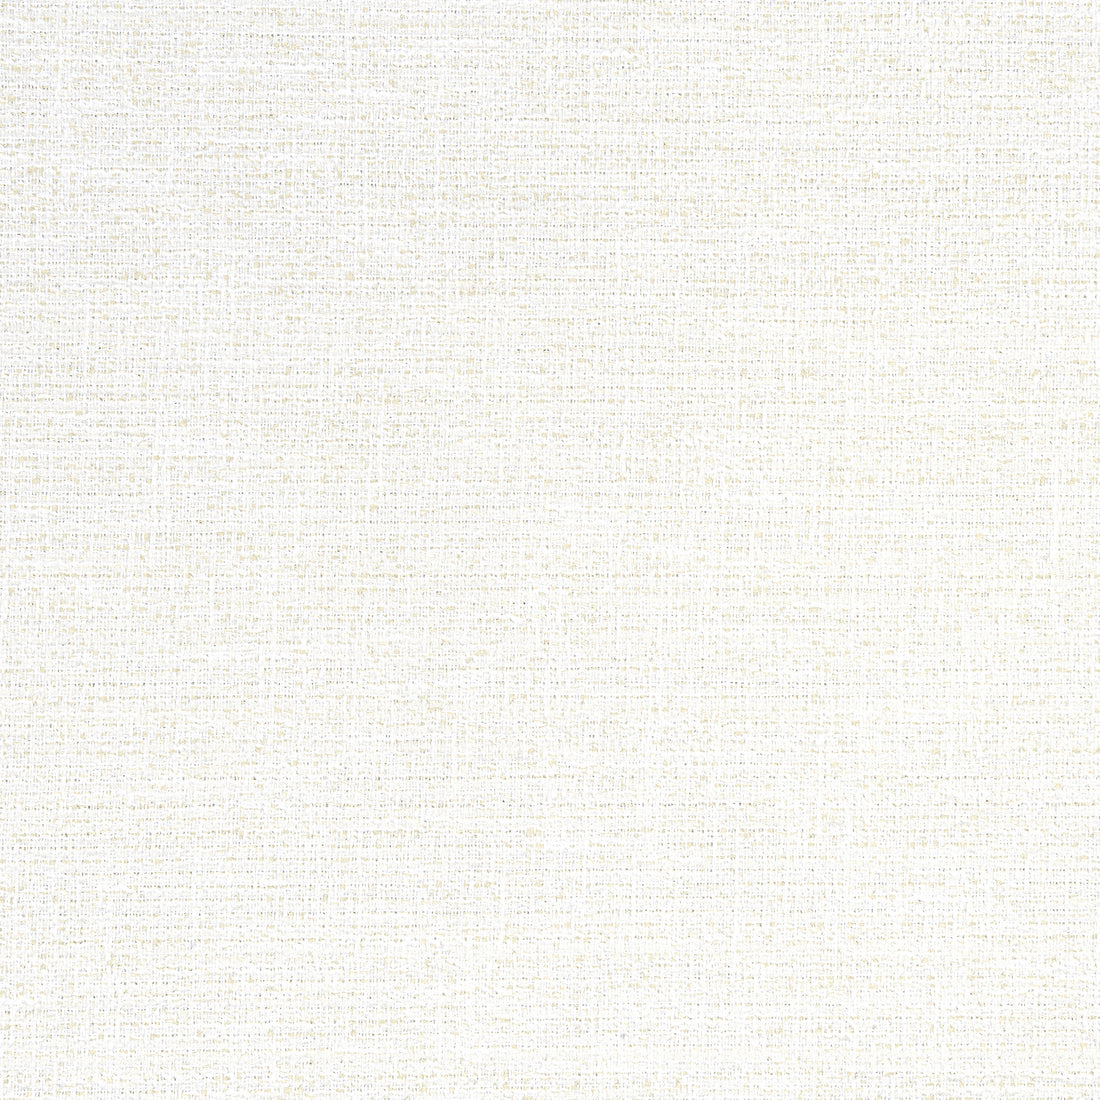 Adria fabric in salt color - pattern number W8791 - by Thibaut in the Haven Textures collection